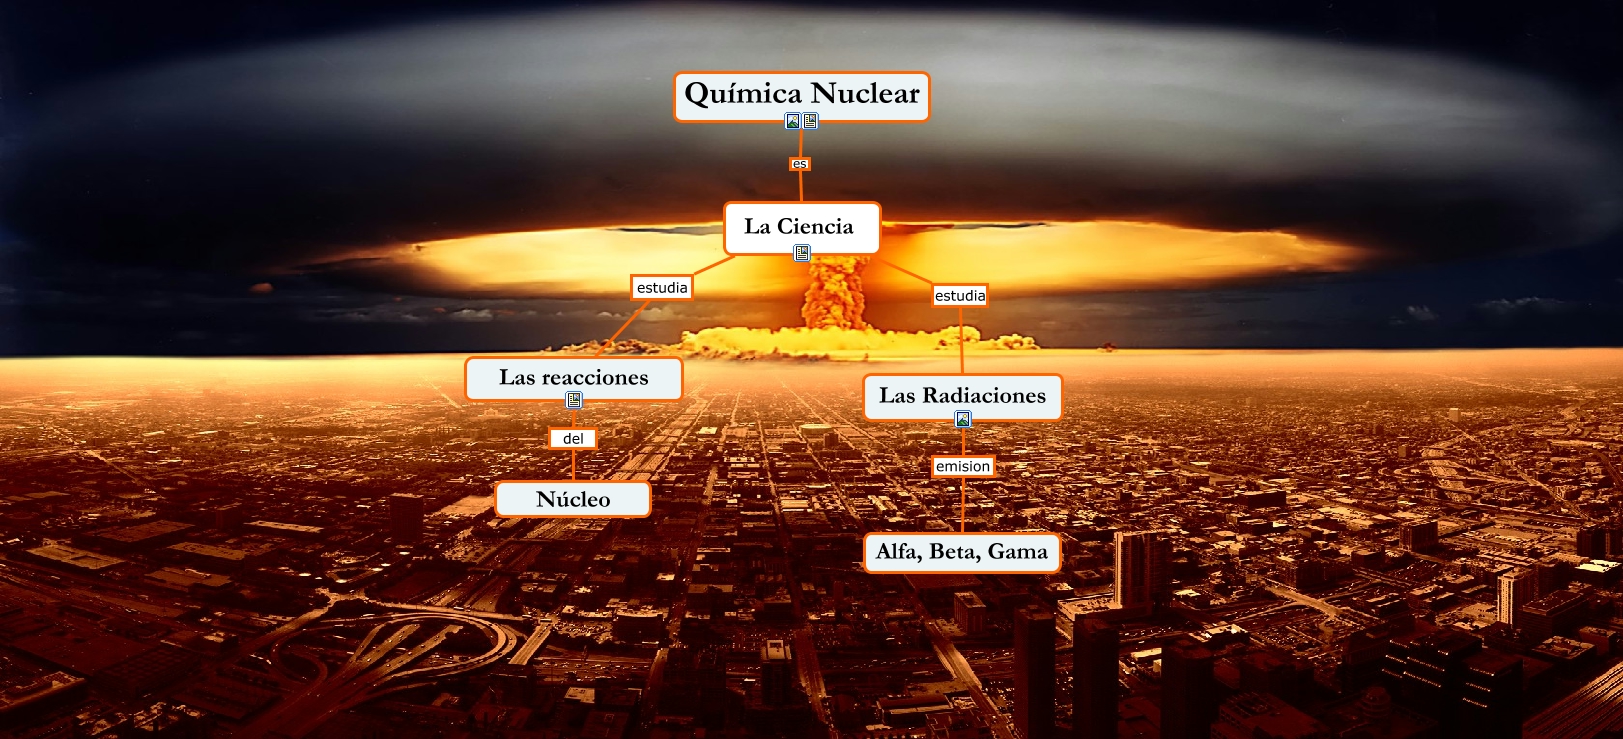 Quimica nuclear